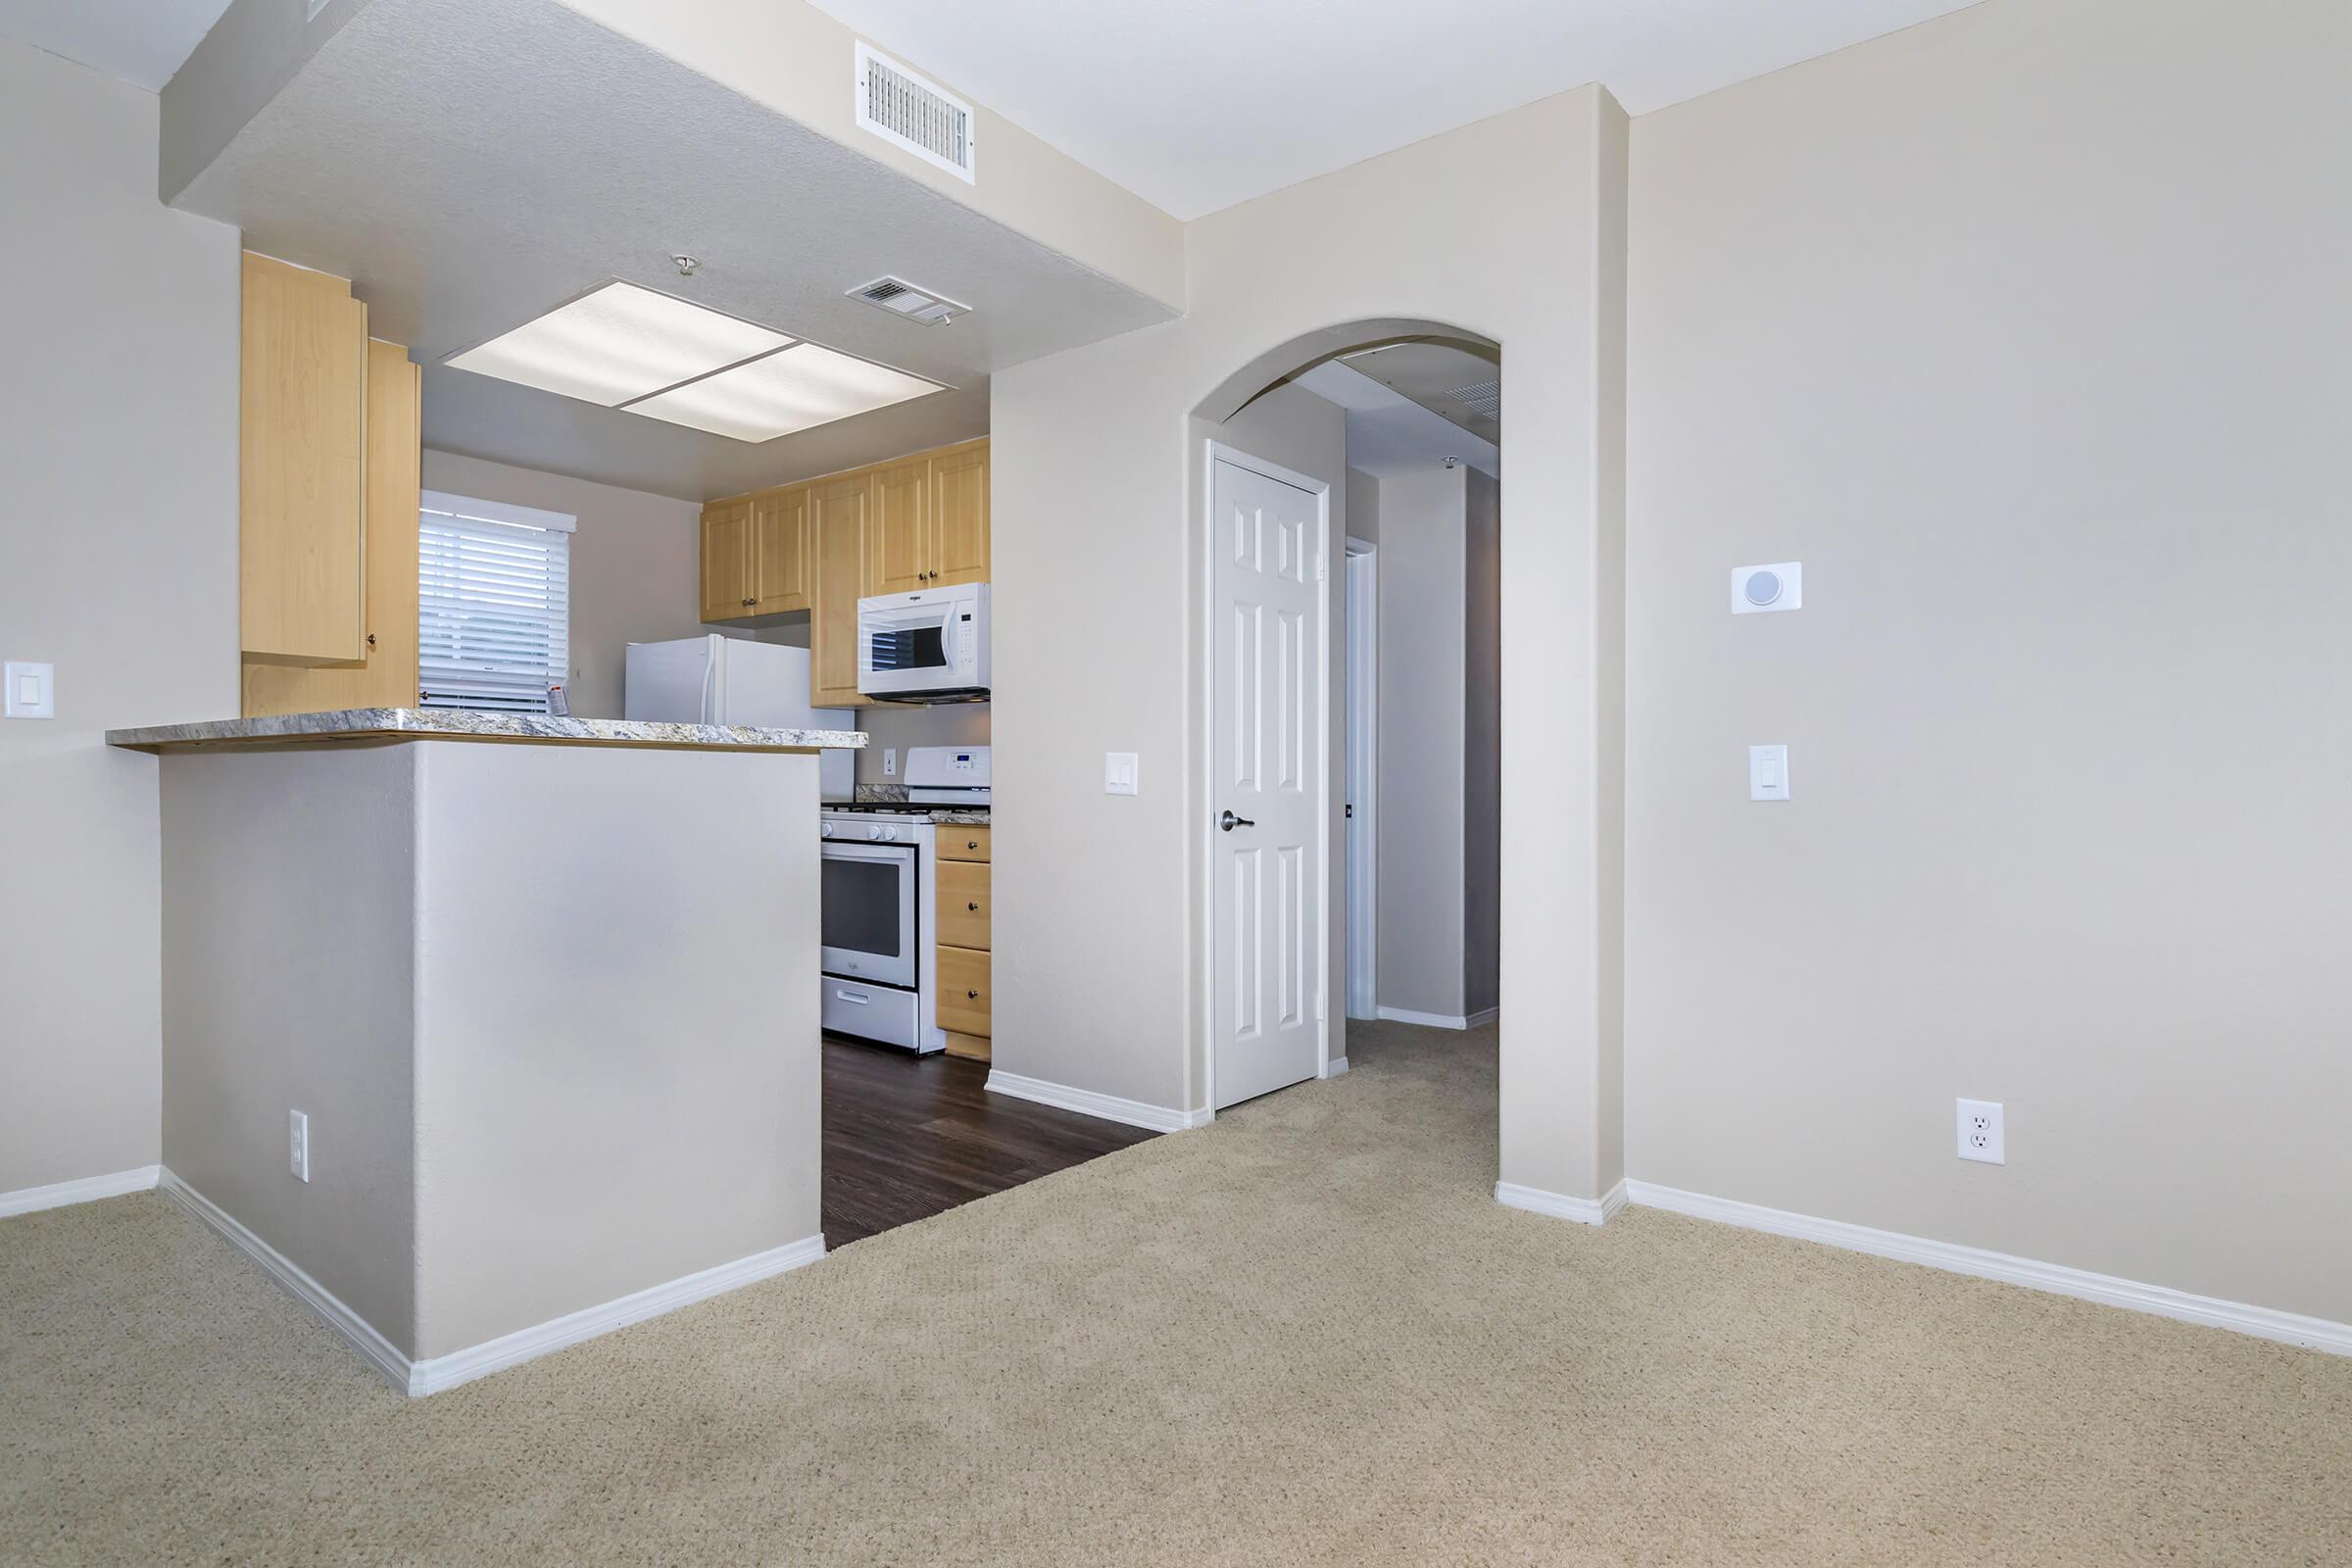 Laurel Glen Apartment Homes has spacious kitchen with breakfast bars